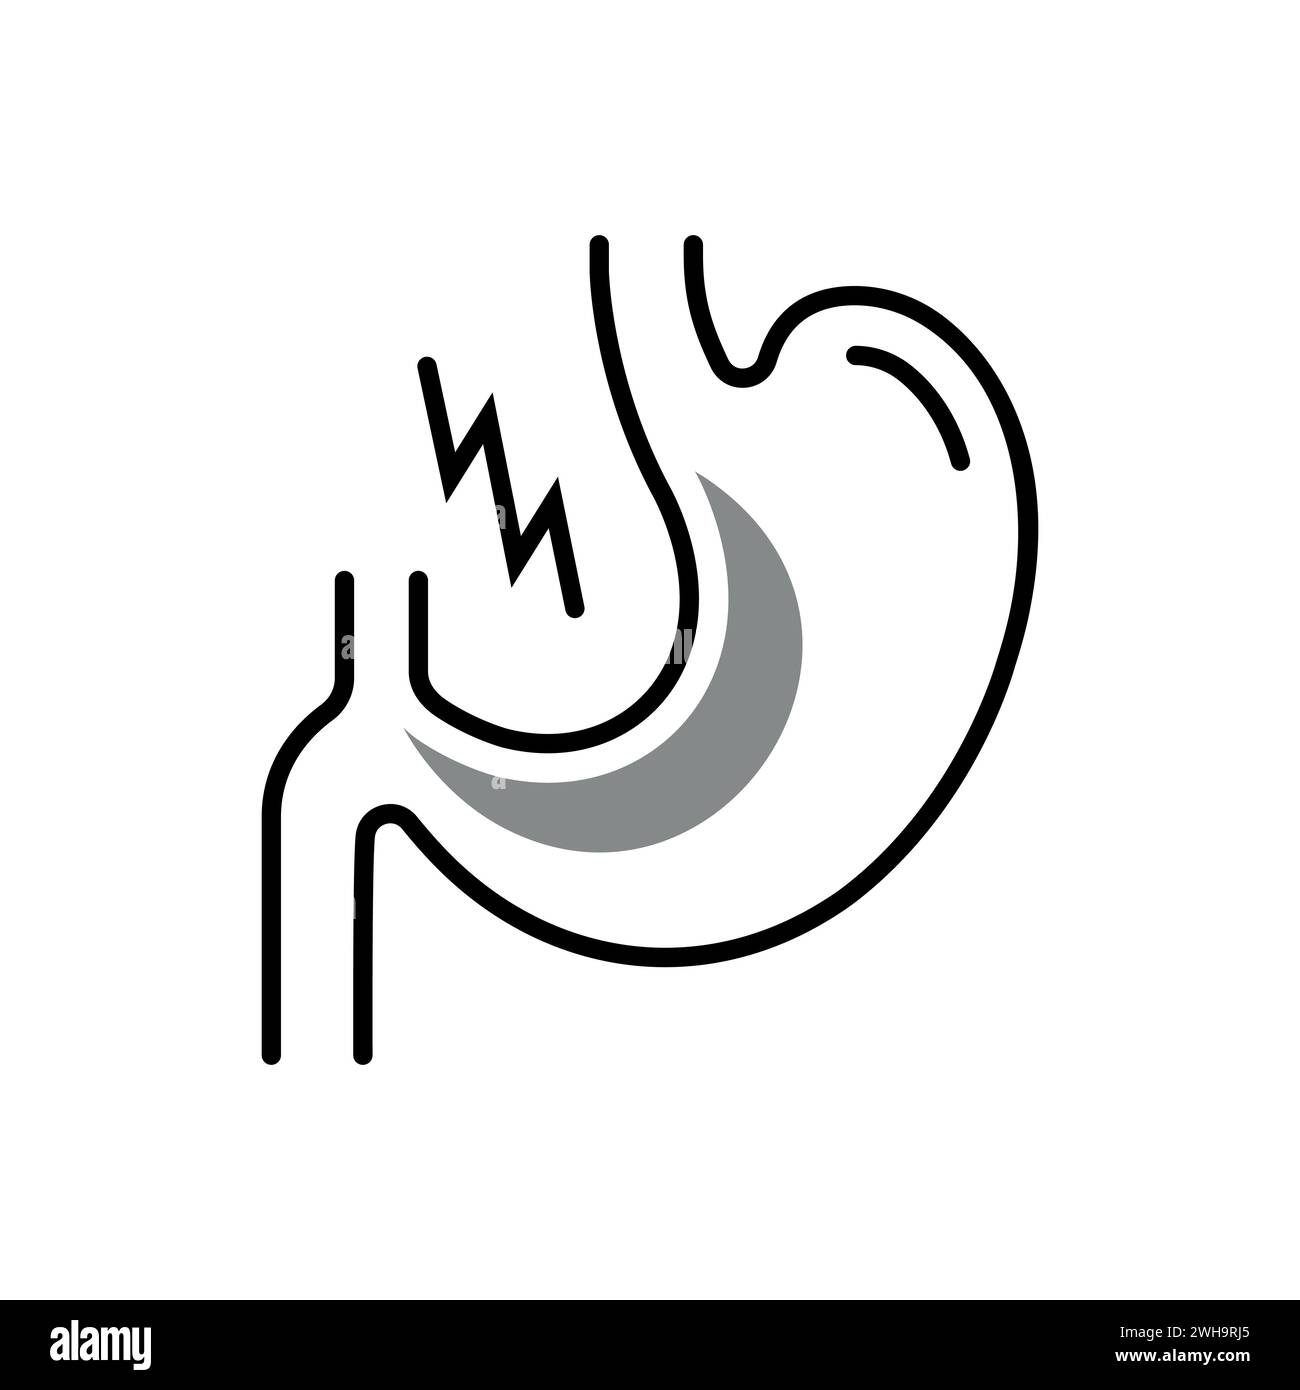 human body parts black vector art in cool background Stock Vector